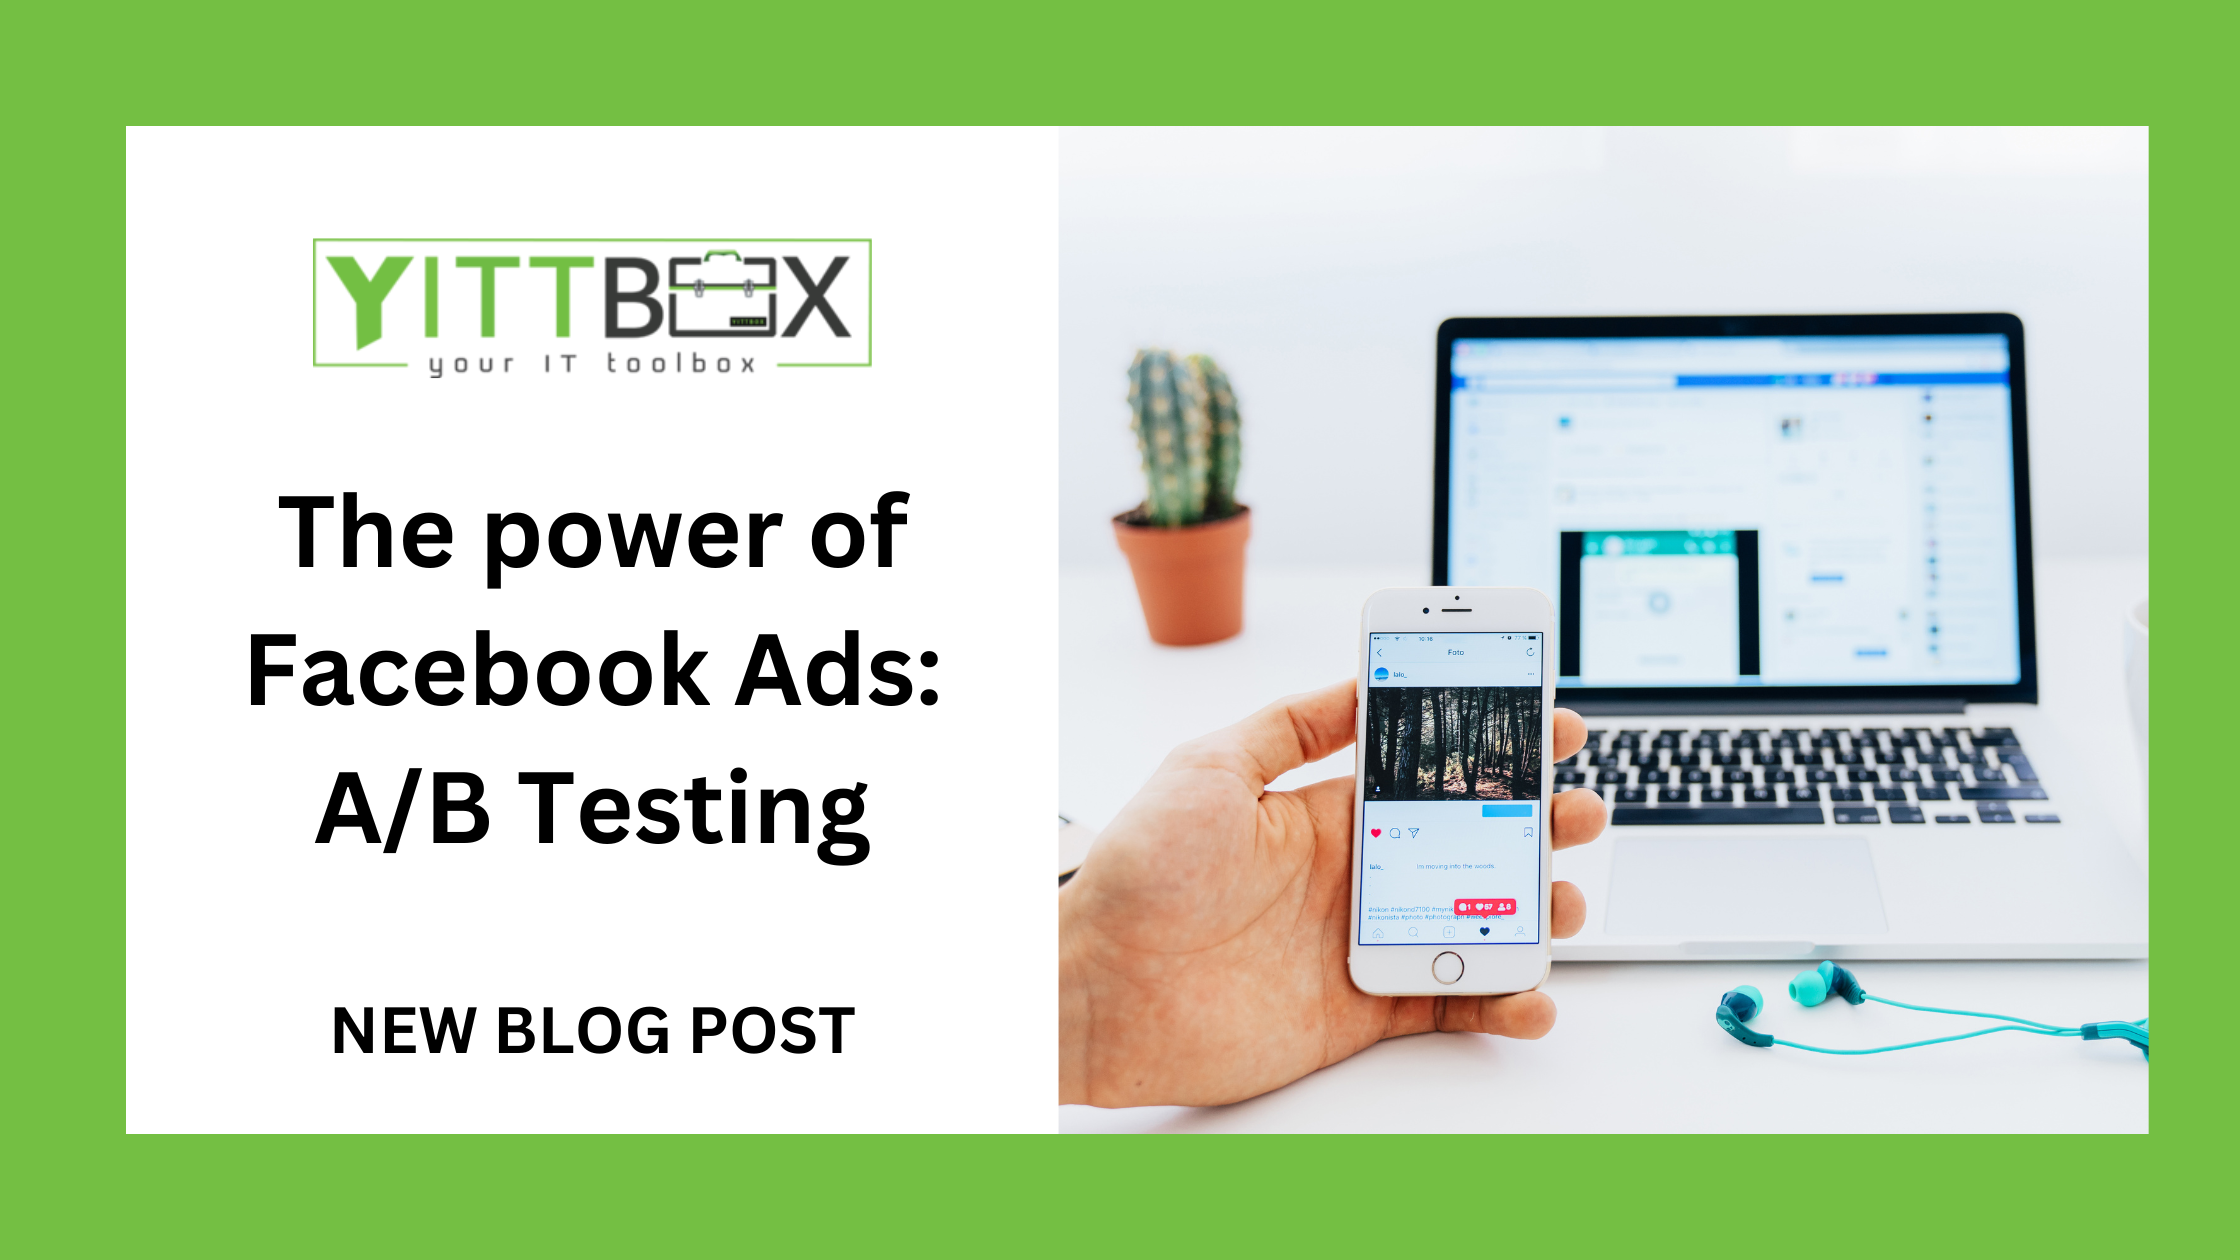 The power of Facebook Ads: A/B Testing